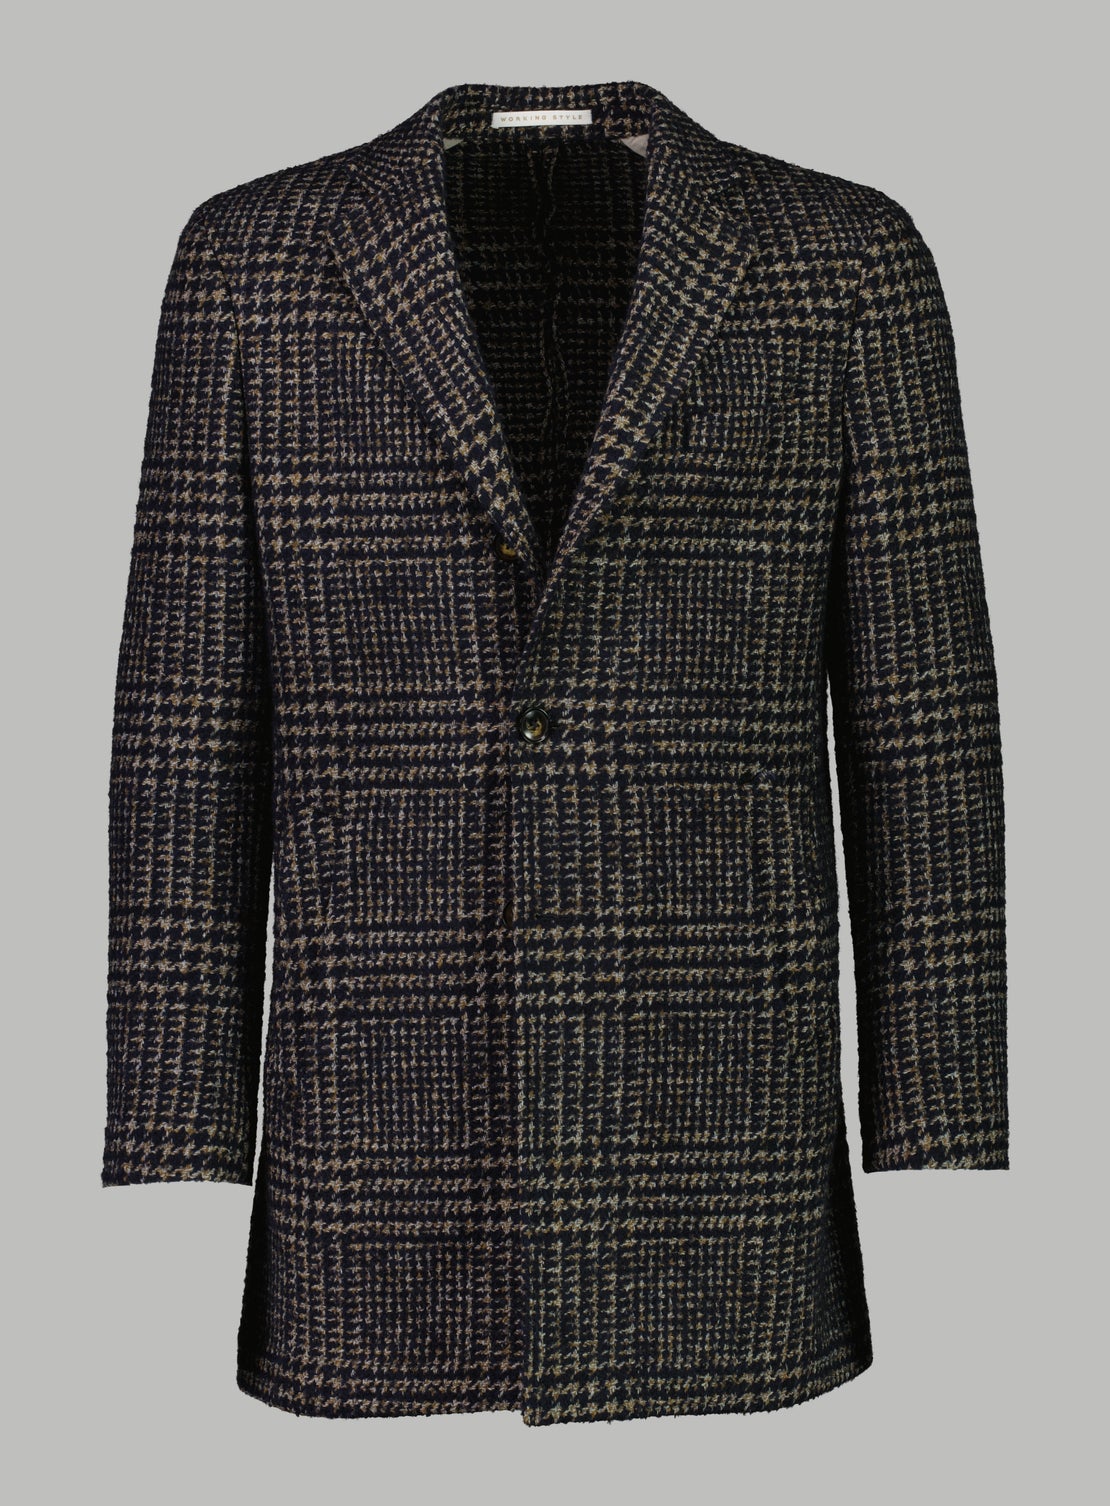 Rosenthal Charcoal Houndstooth Overcoat